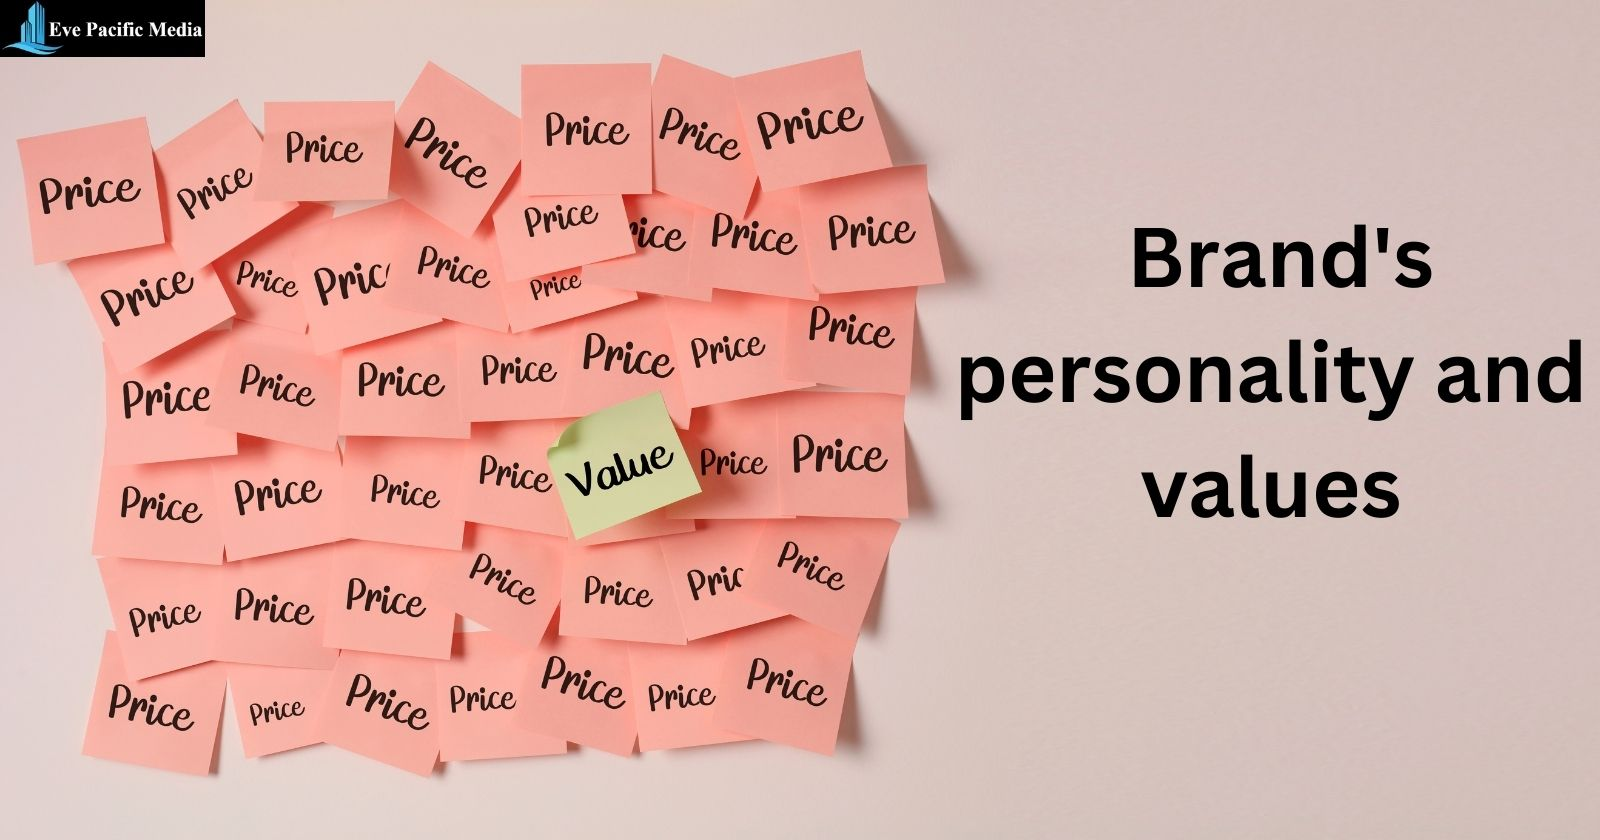 Pink notes with a text "price" and a text written "Brand's personality and values"